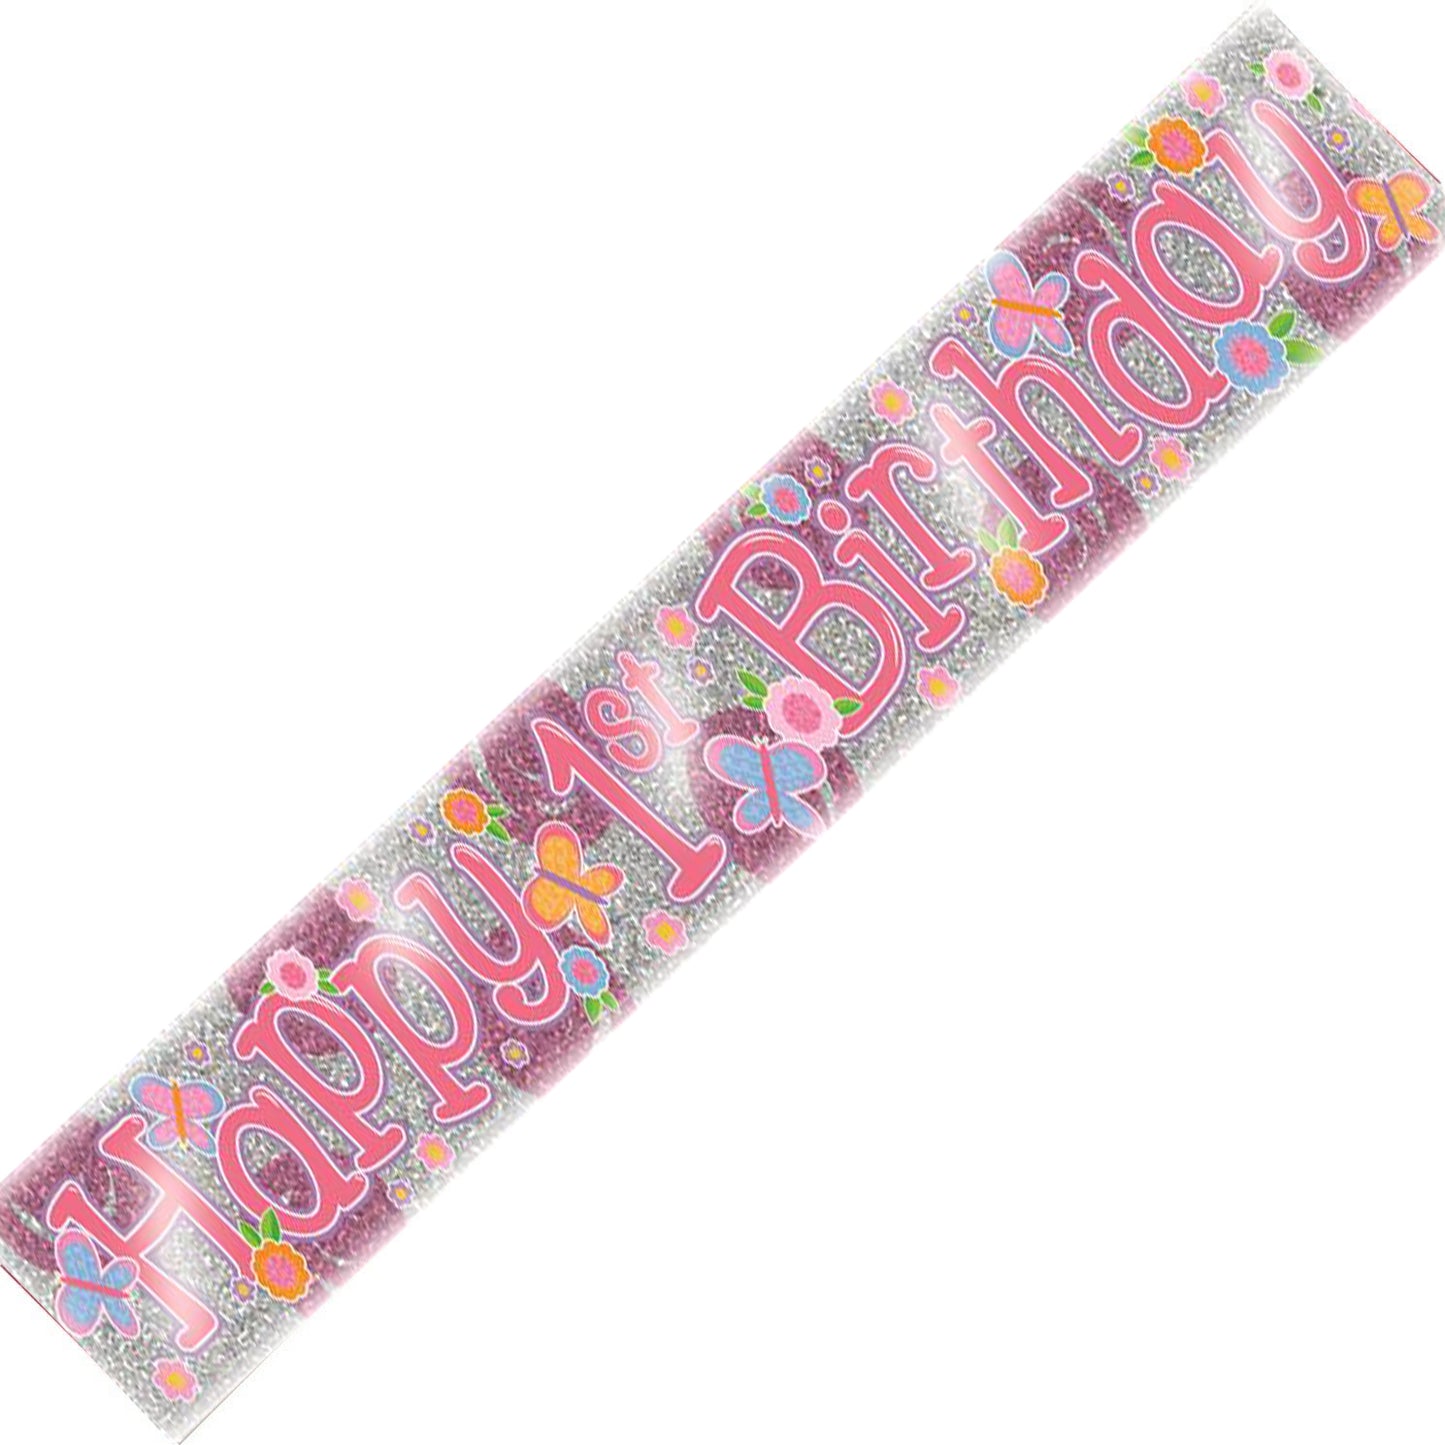 Age 1 Birthday Banner Pink And Silver Holographic Recyclable 1st Birthday Party Banner